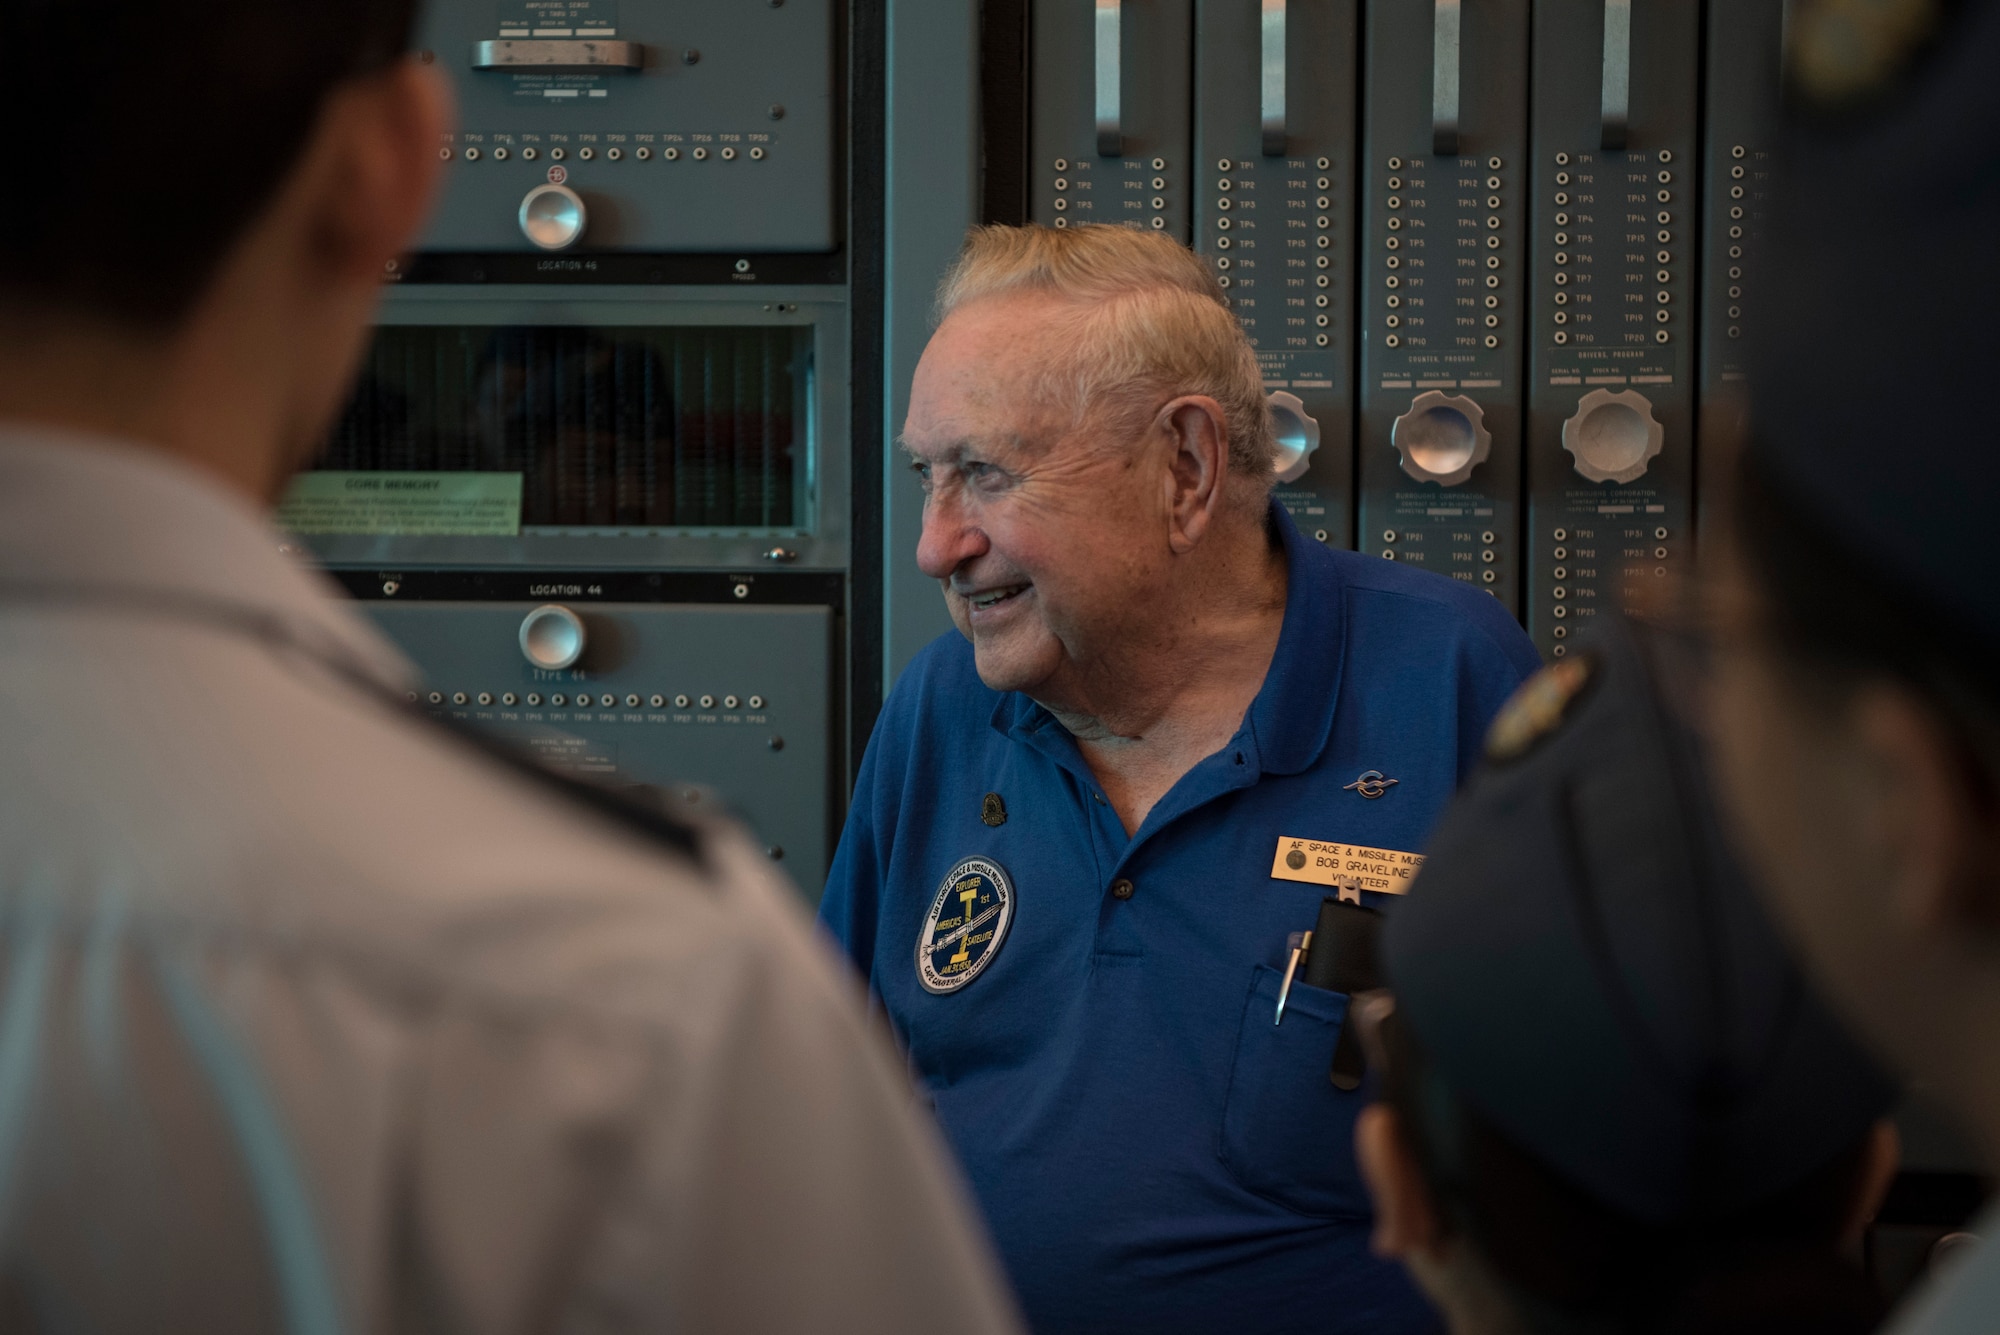 Bob Graveline, Air Force Space and Missile Museum volunteer, educates Royal Canadian Air Cadets from Toronto, Canada, about previous U.S. space missions during their tour of Cape Canaveral Air Force Station, Fla on March 11, 2019.